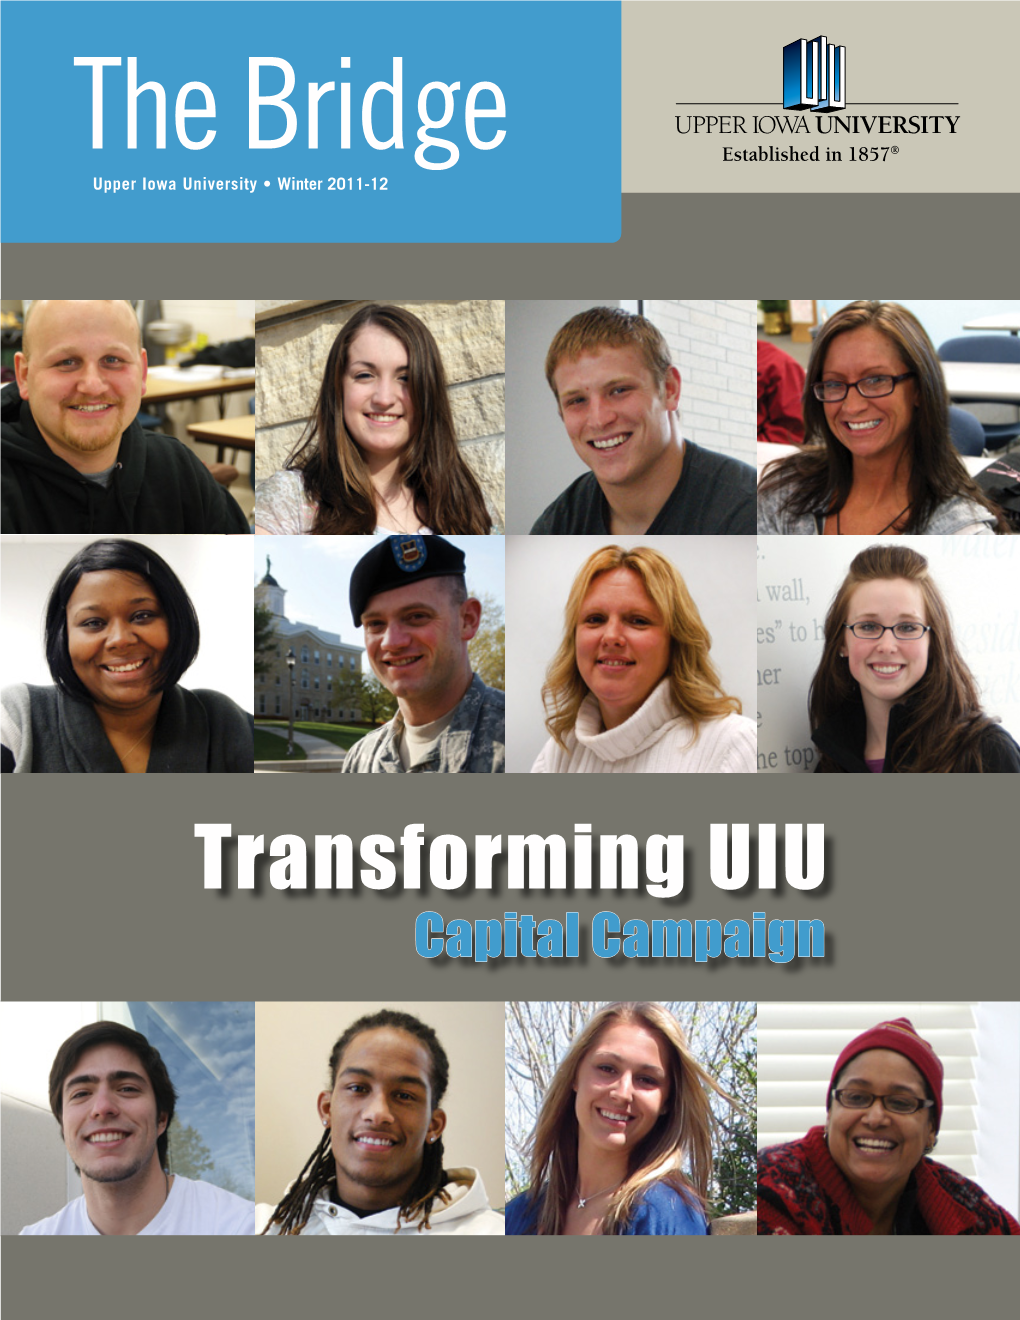 Transforming UIU Capital Campaign from the President